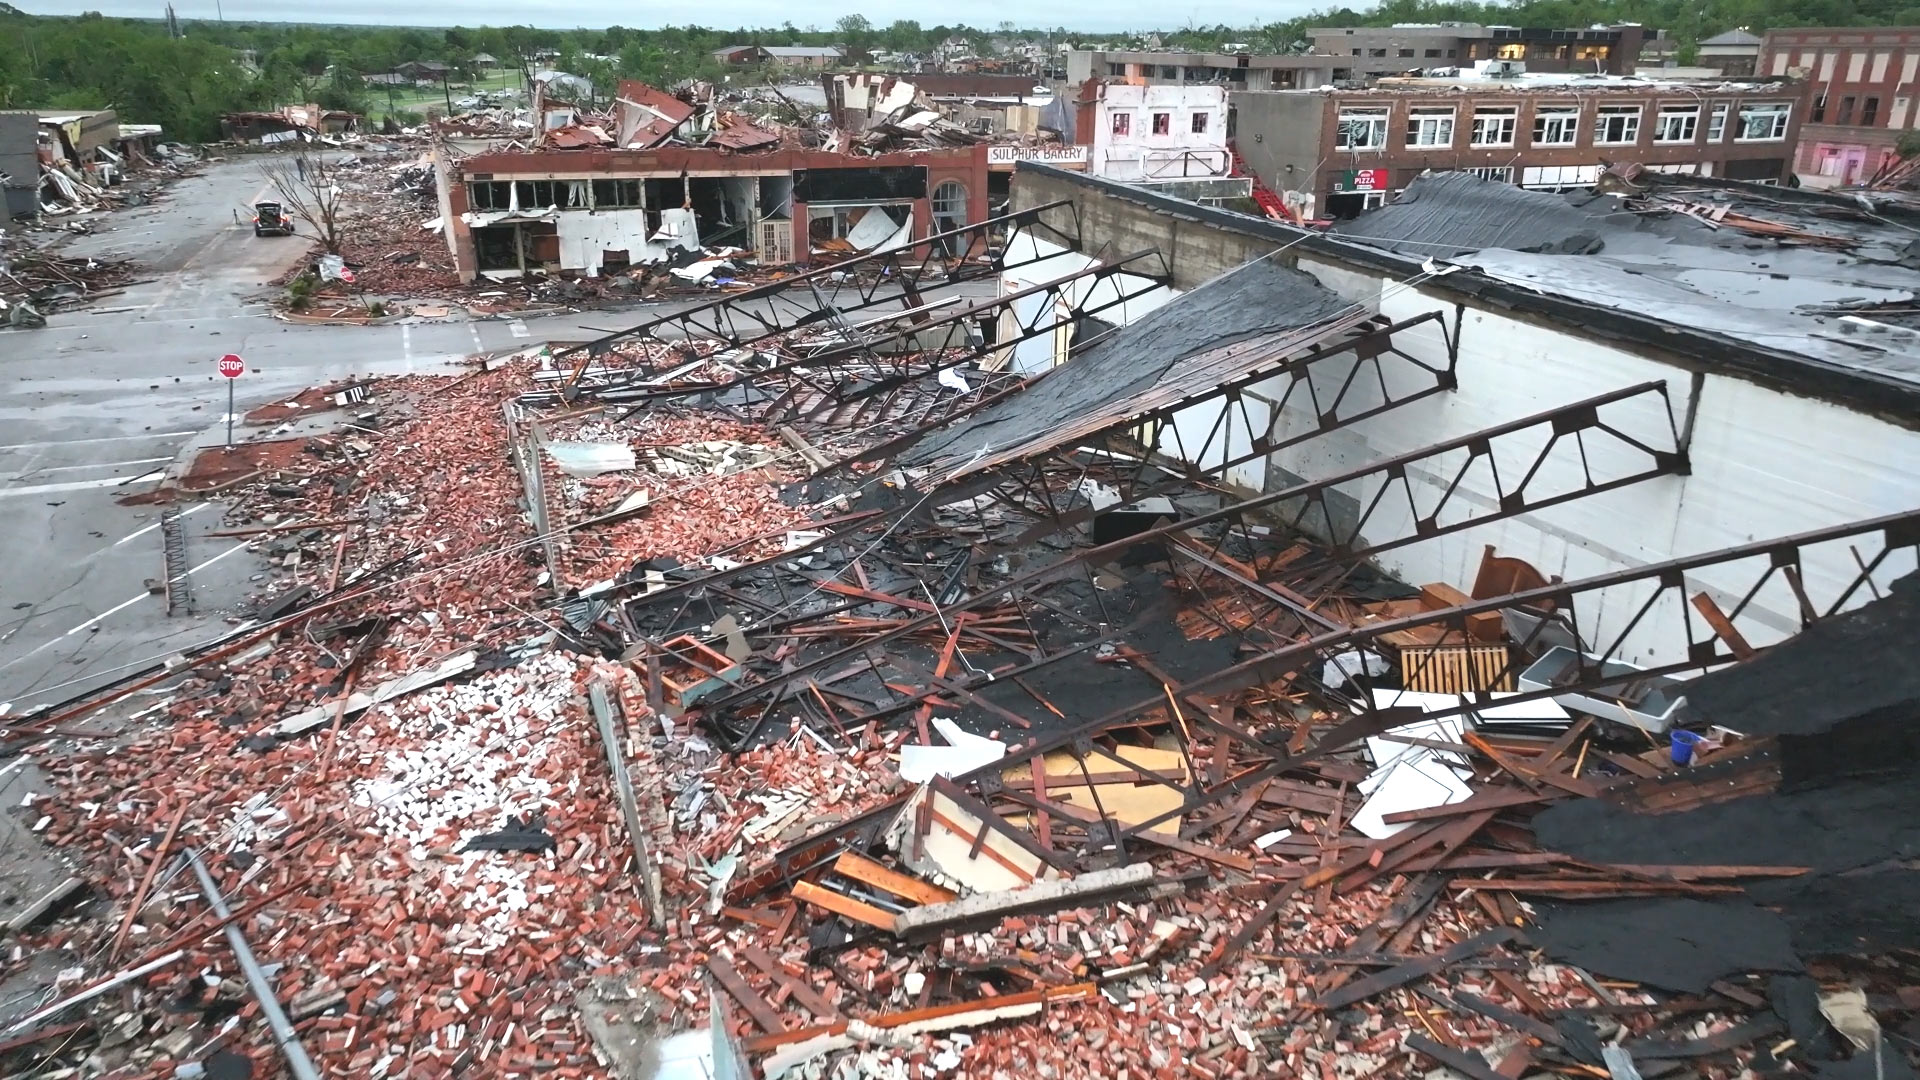 Partial collapse of a commercial building's roof and walls following a tornado strike.